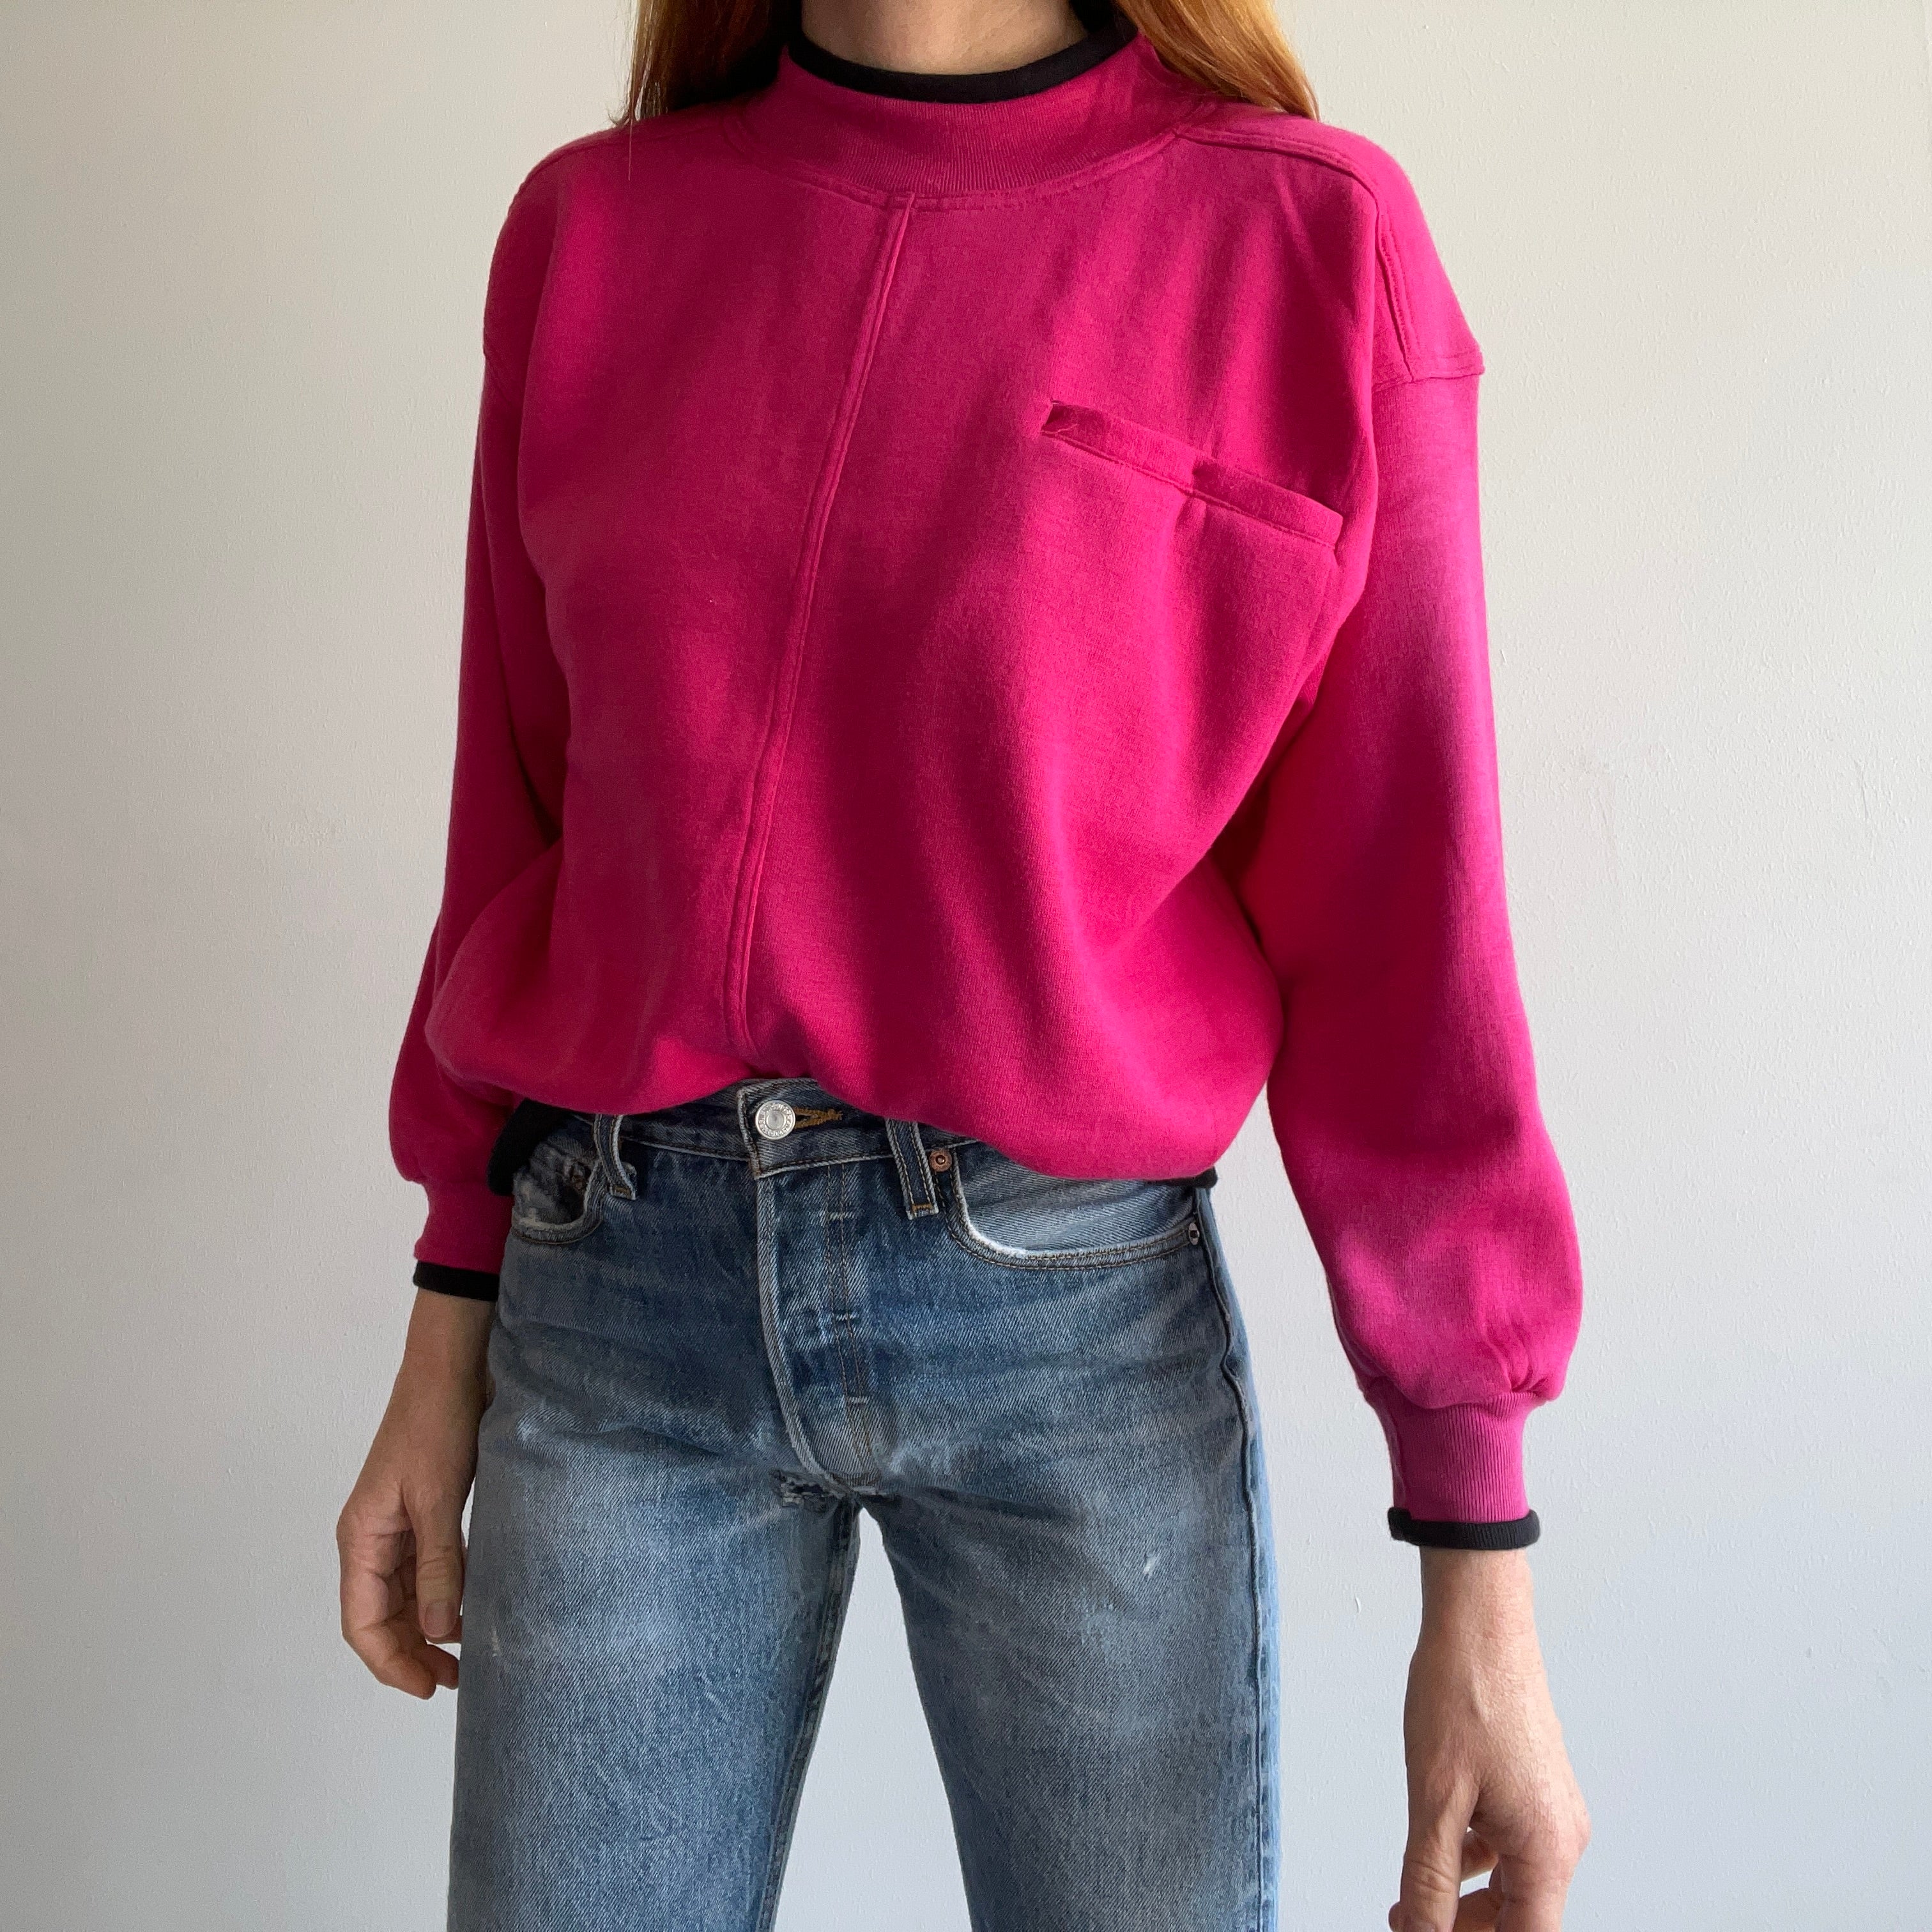 1980s Two Tone Pink and Black SUPER DUPER SOFT and Slouchy Pocket Sweatshirt